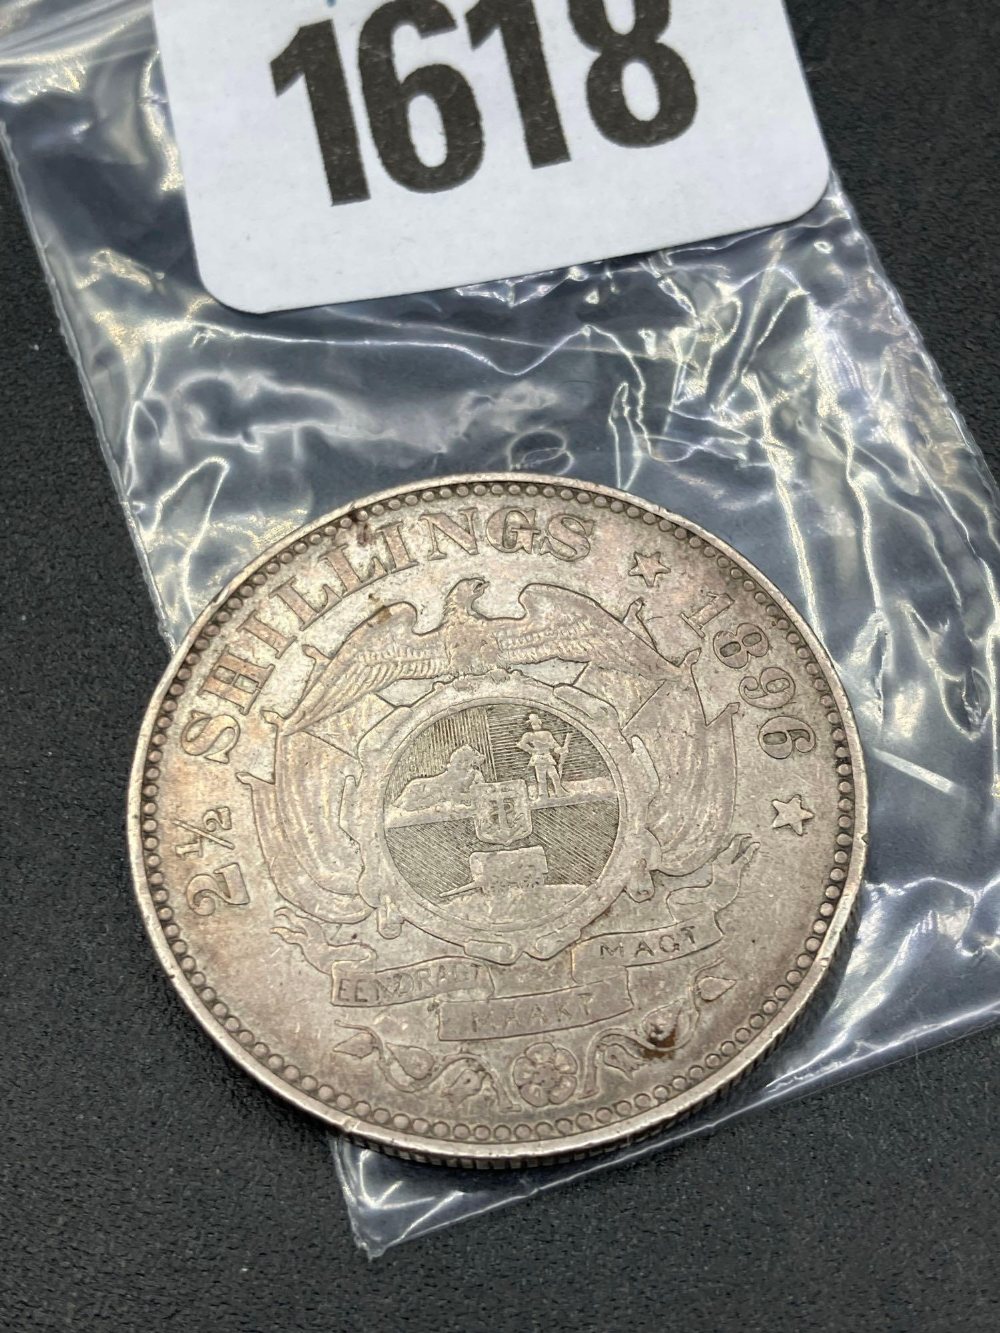 South Africa half crown 1896 - Image 2 of 2